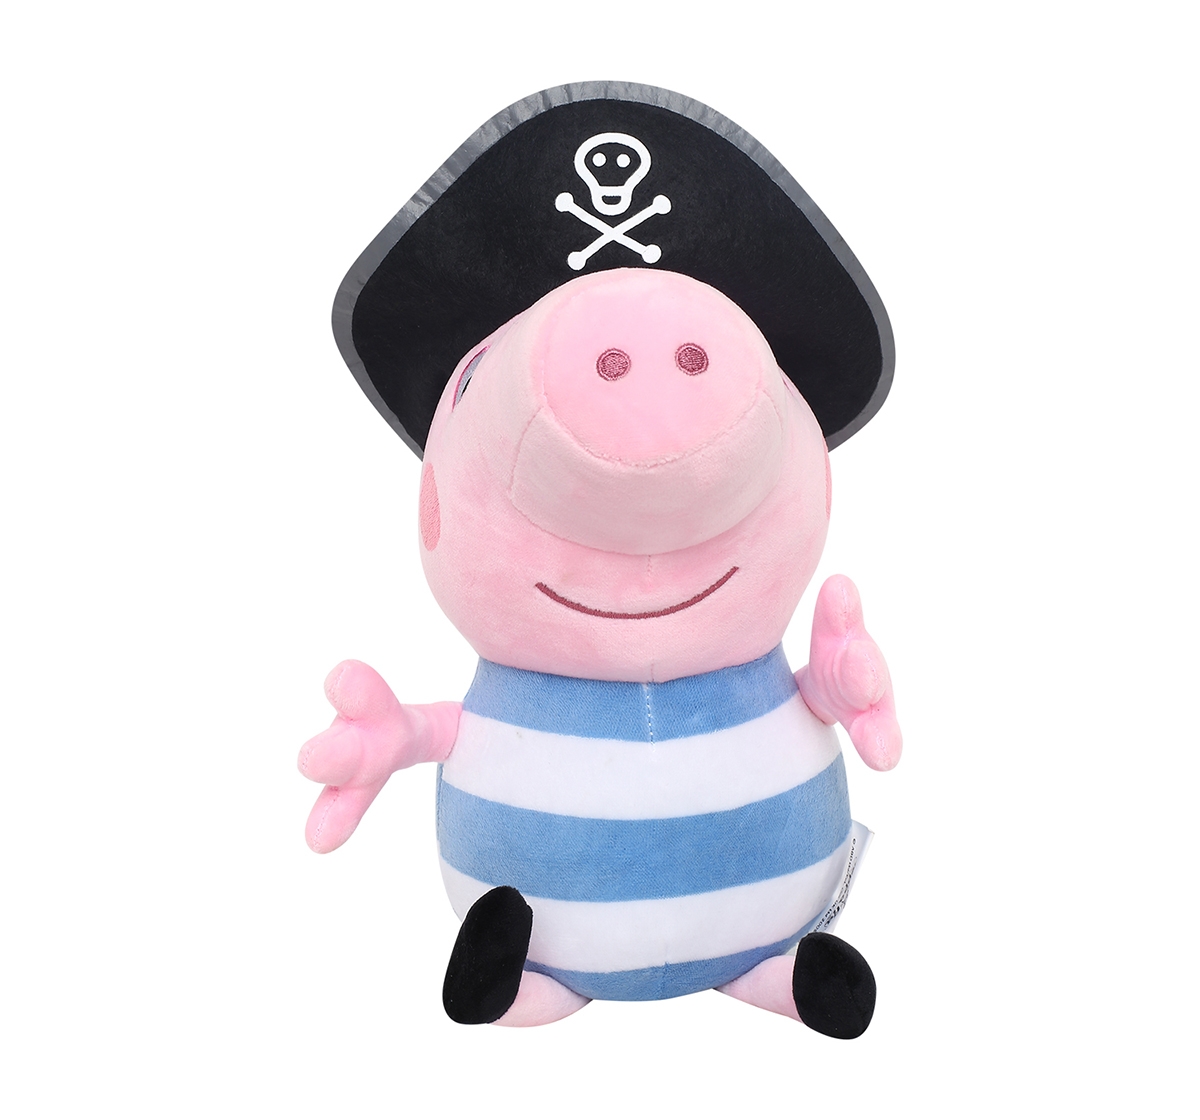 Peppa Pig | Peppa Pig In Pirate Costume Multi Color 30 Cm Soft Toy for Kids age 3Y+ - 30 Cm 0